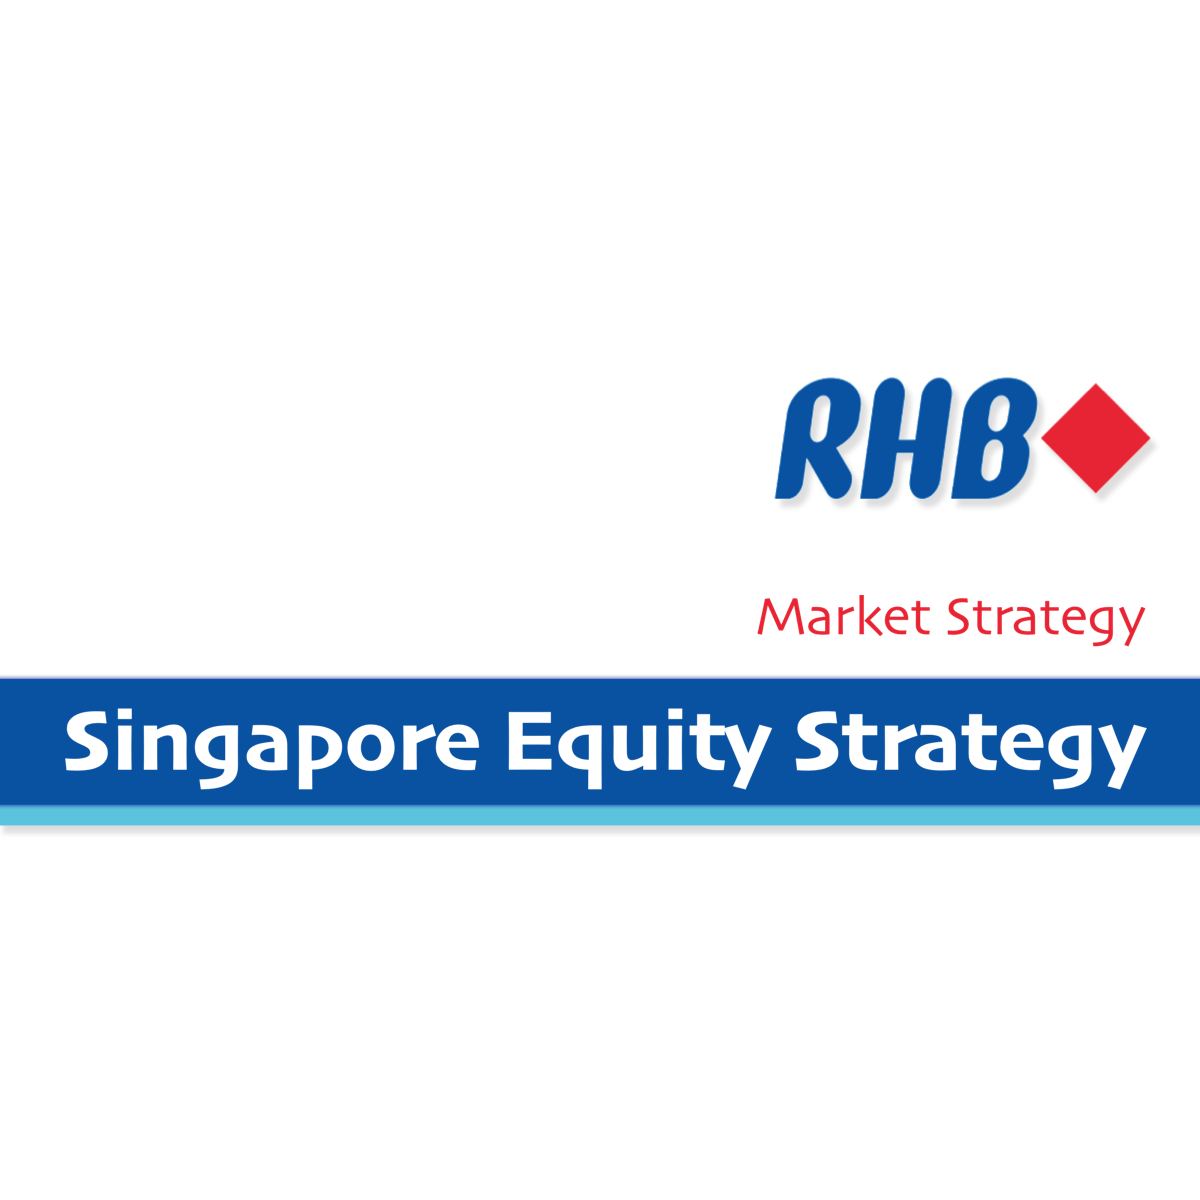 Singapore Equity Strategy - RHB Investment Research | SGinvestors.io